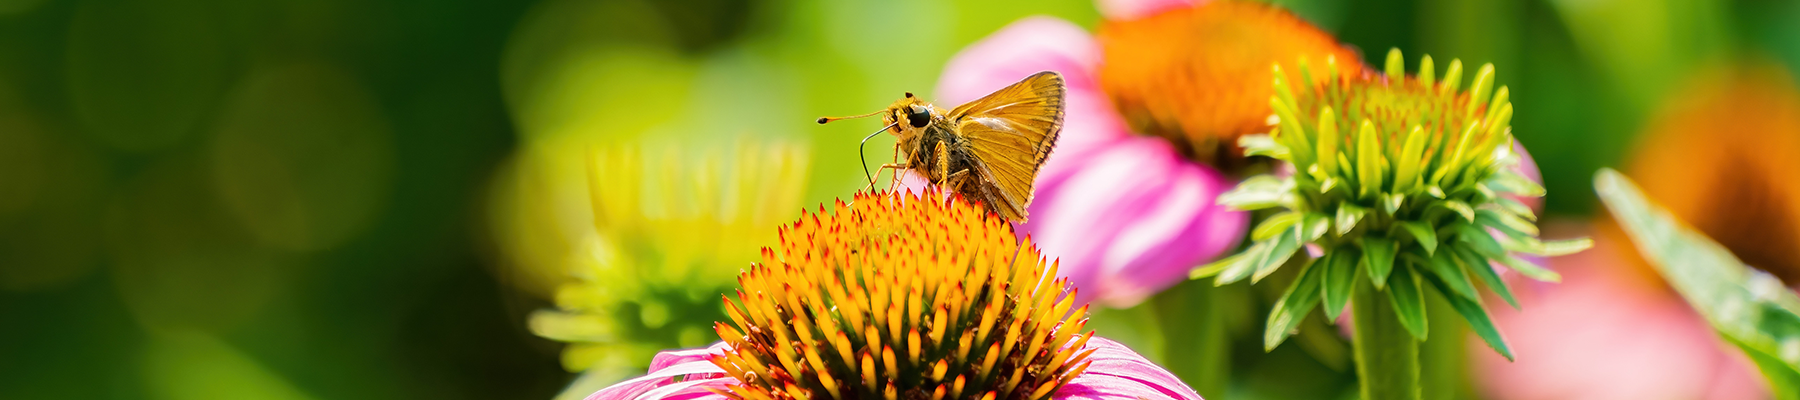 A Dakota Skipper butterfly rests atop a coneflower with pink petals and an orange center.